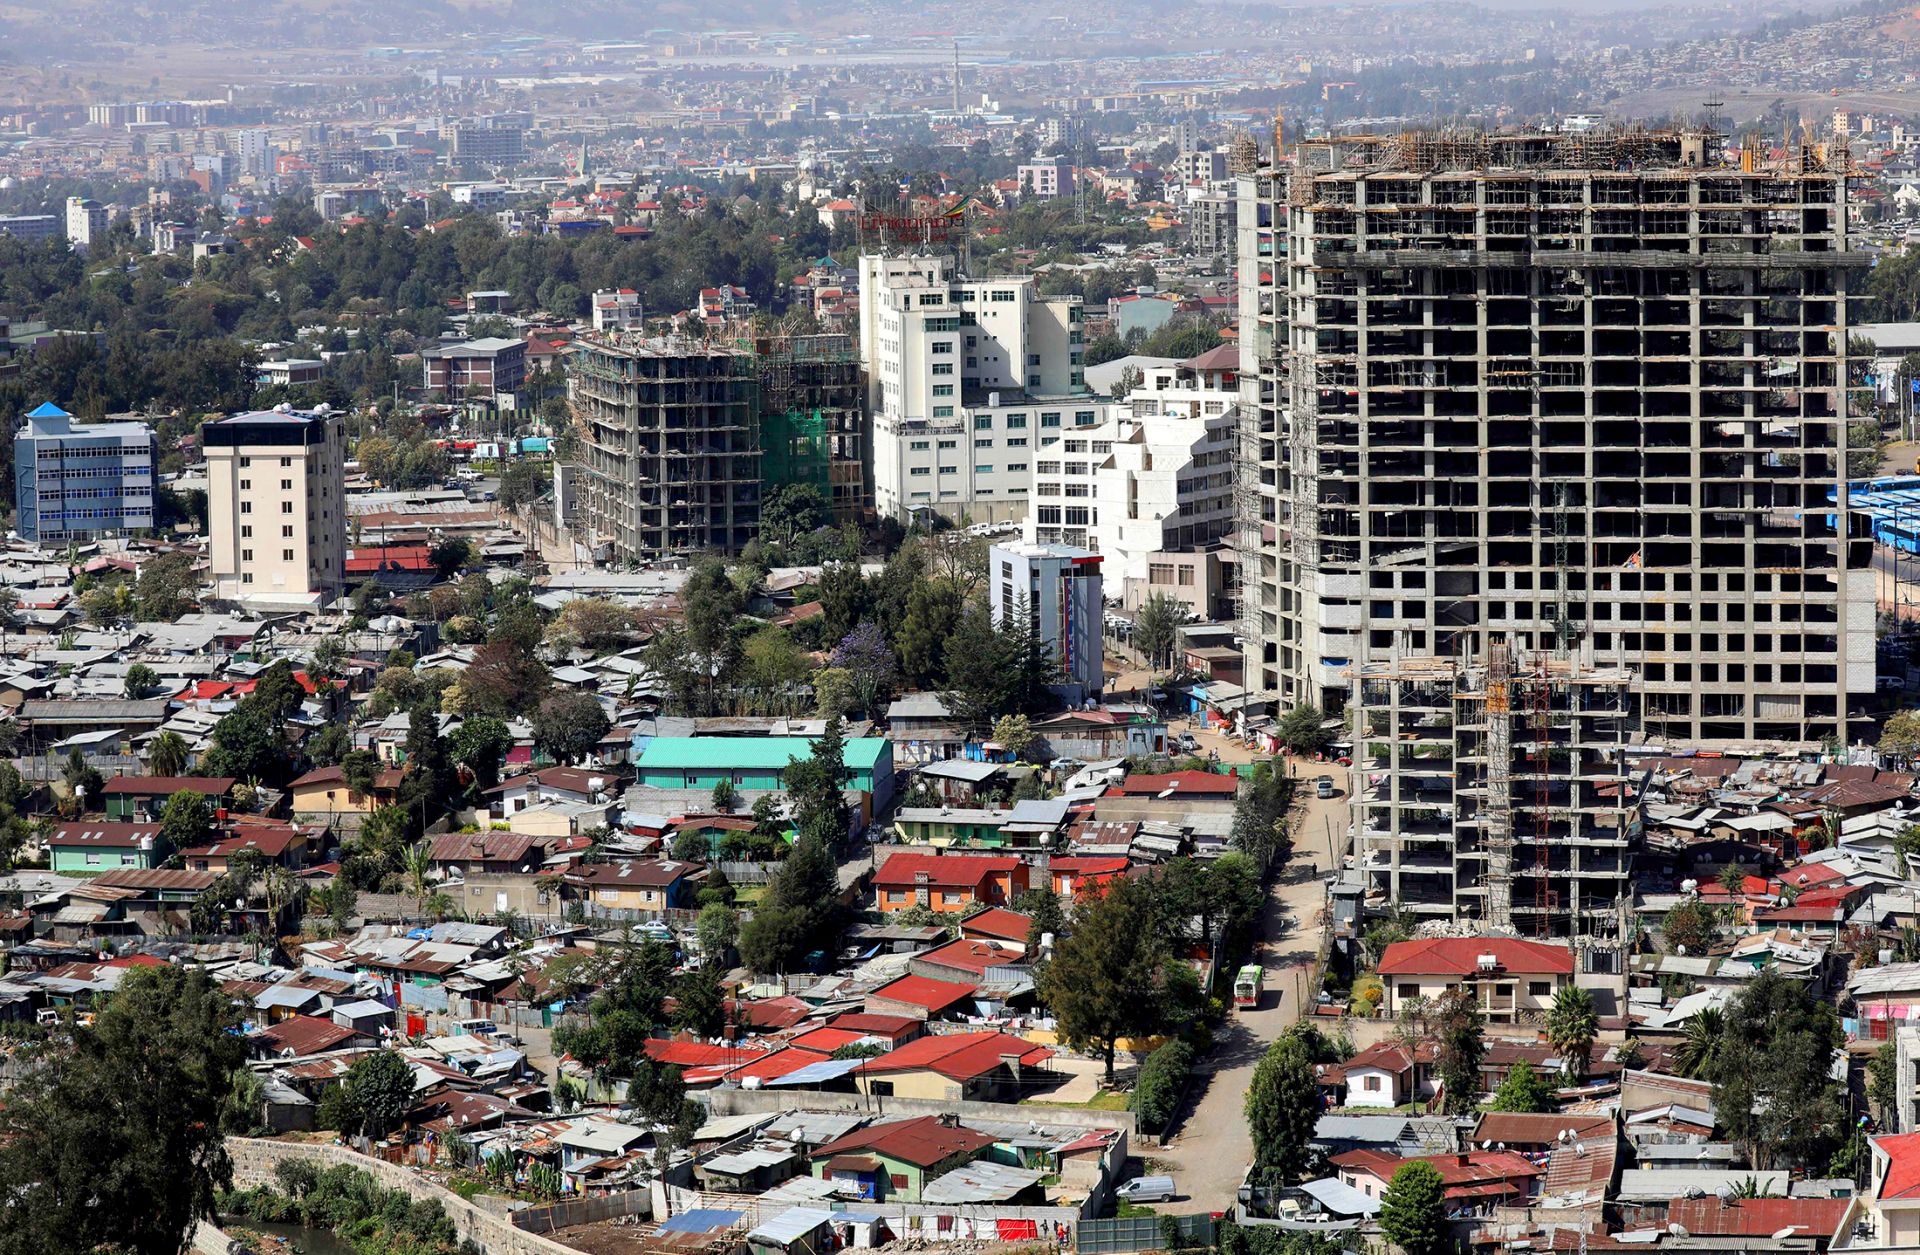 A picture taken on March 13, 2019, shows the construction of a number of new buildings in Addis Ababa.